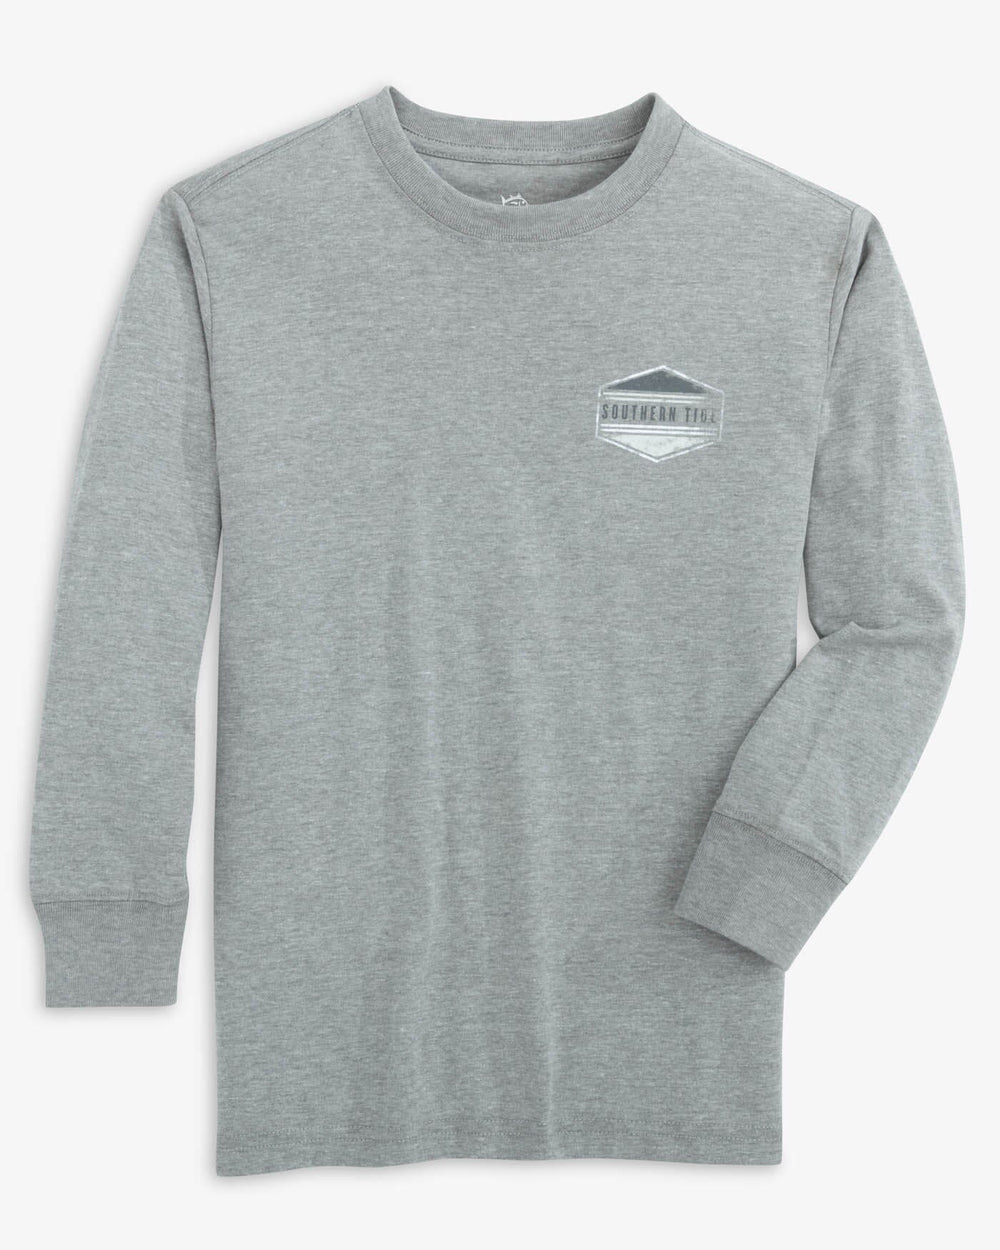 The front view of the Southern Tide Kids ST Deer Hexagon Heather Long Sleeve T-Shirt by Southern Tide - Heather Quarry